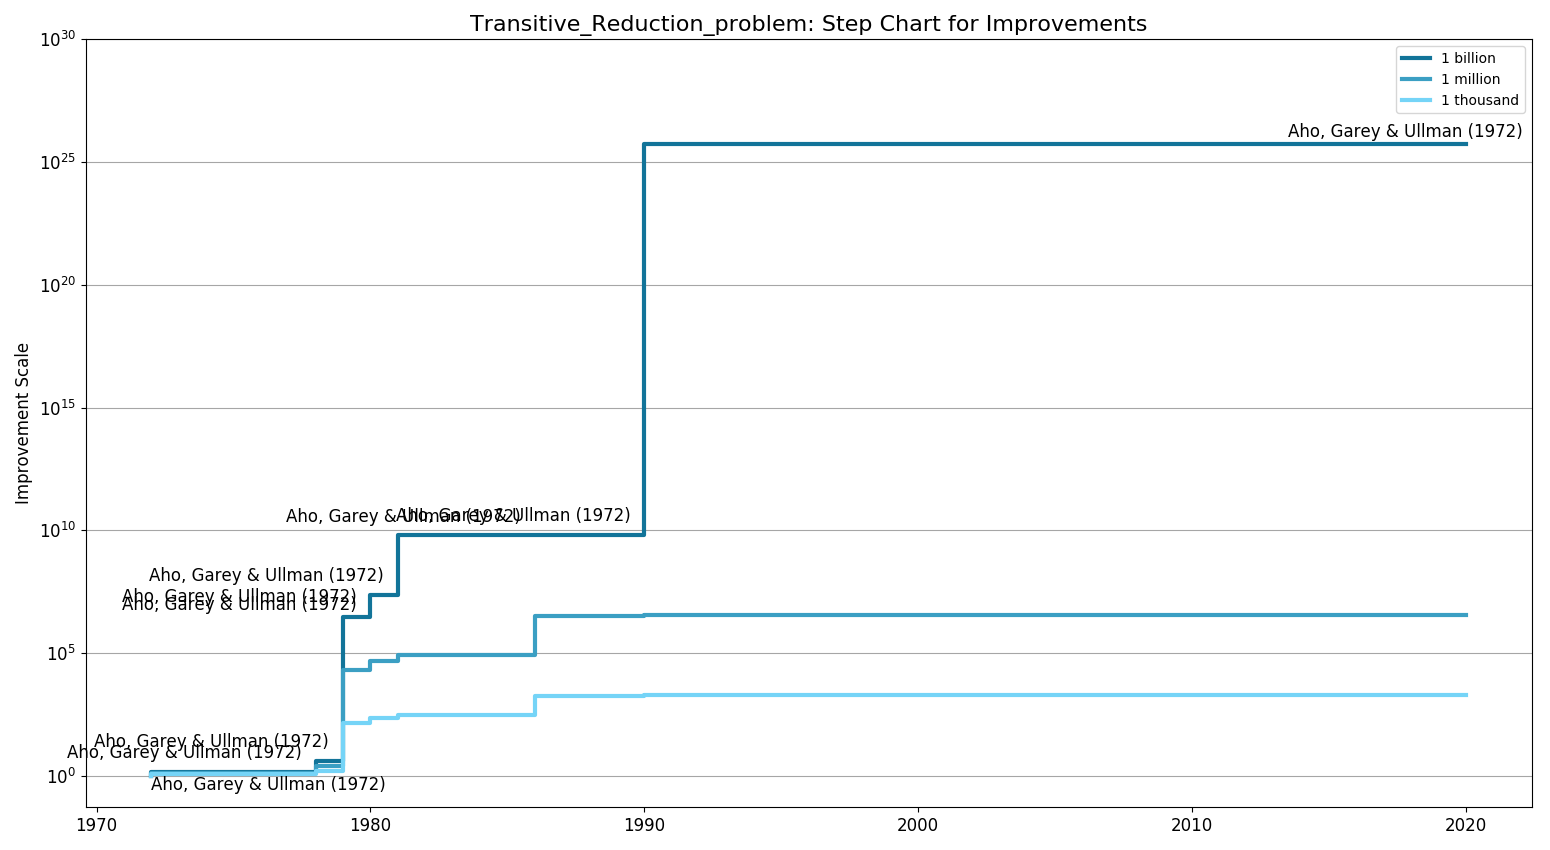 Transitive Reduction problemStepChart.png